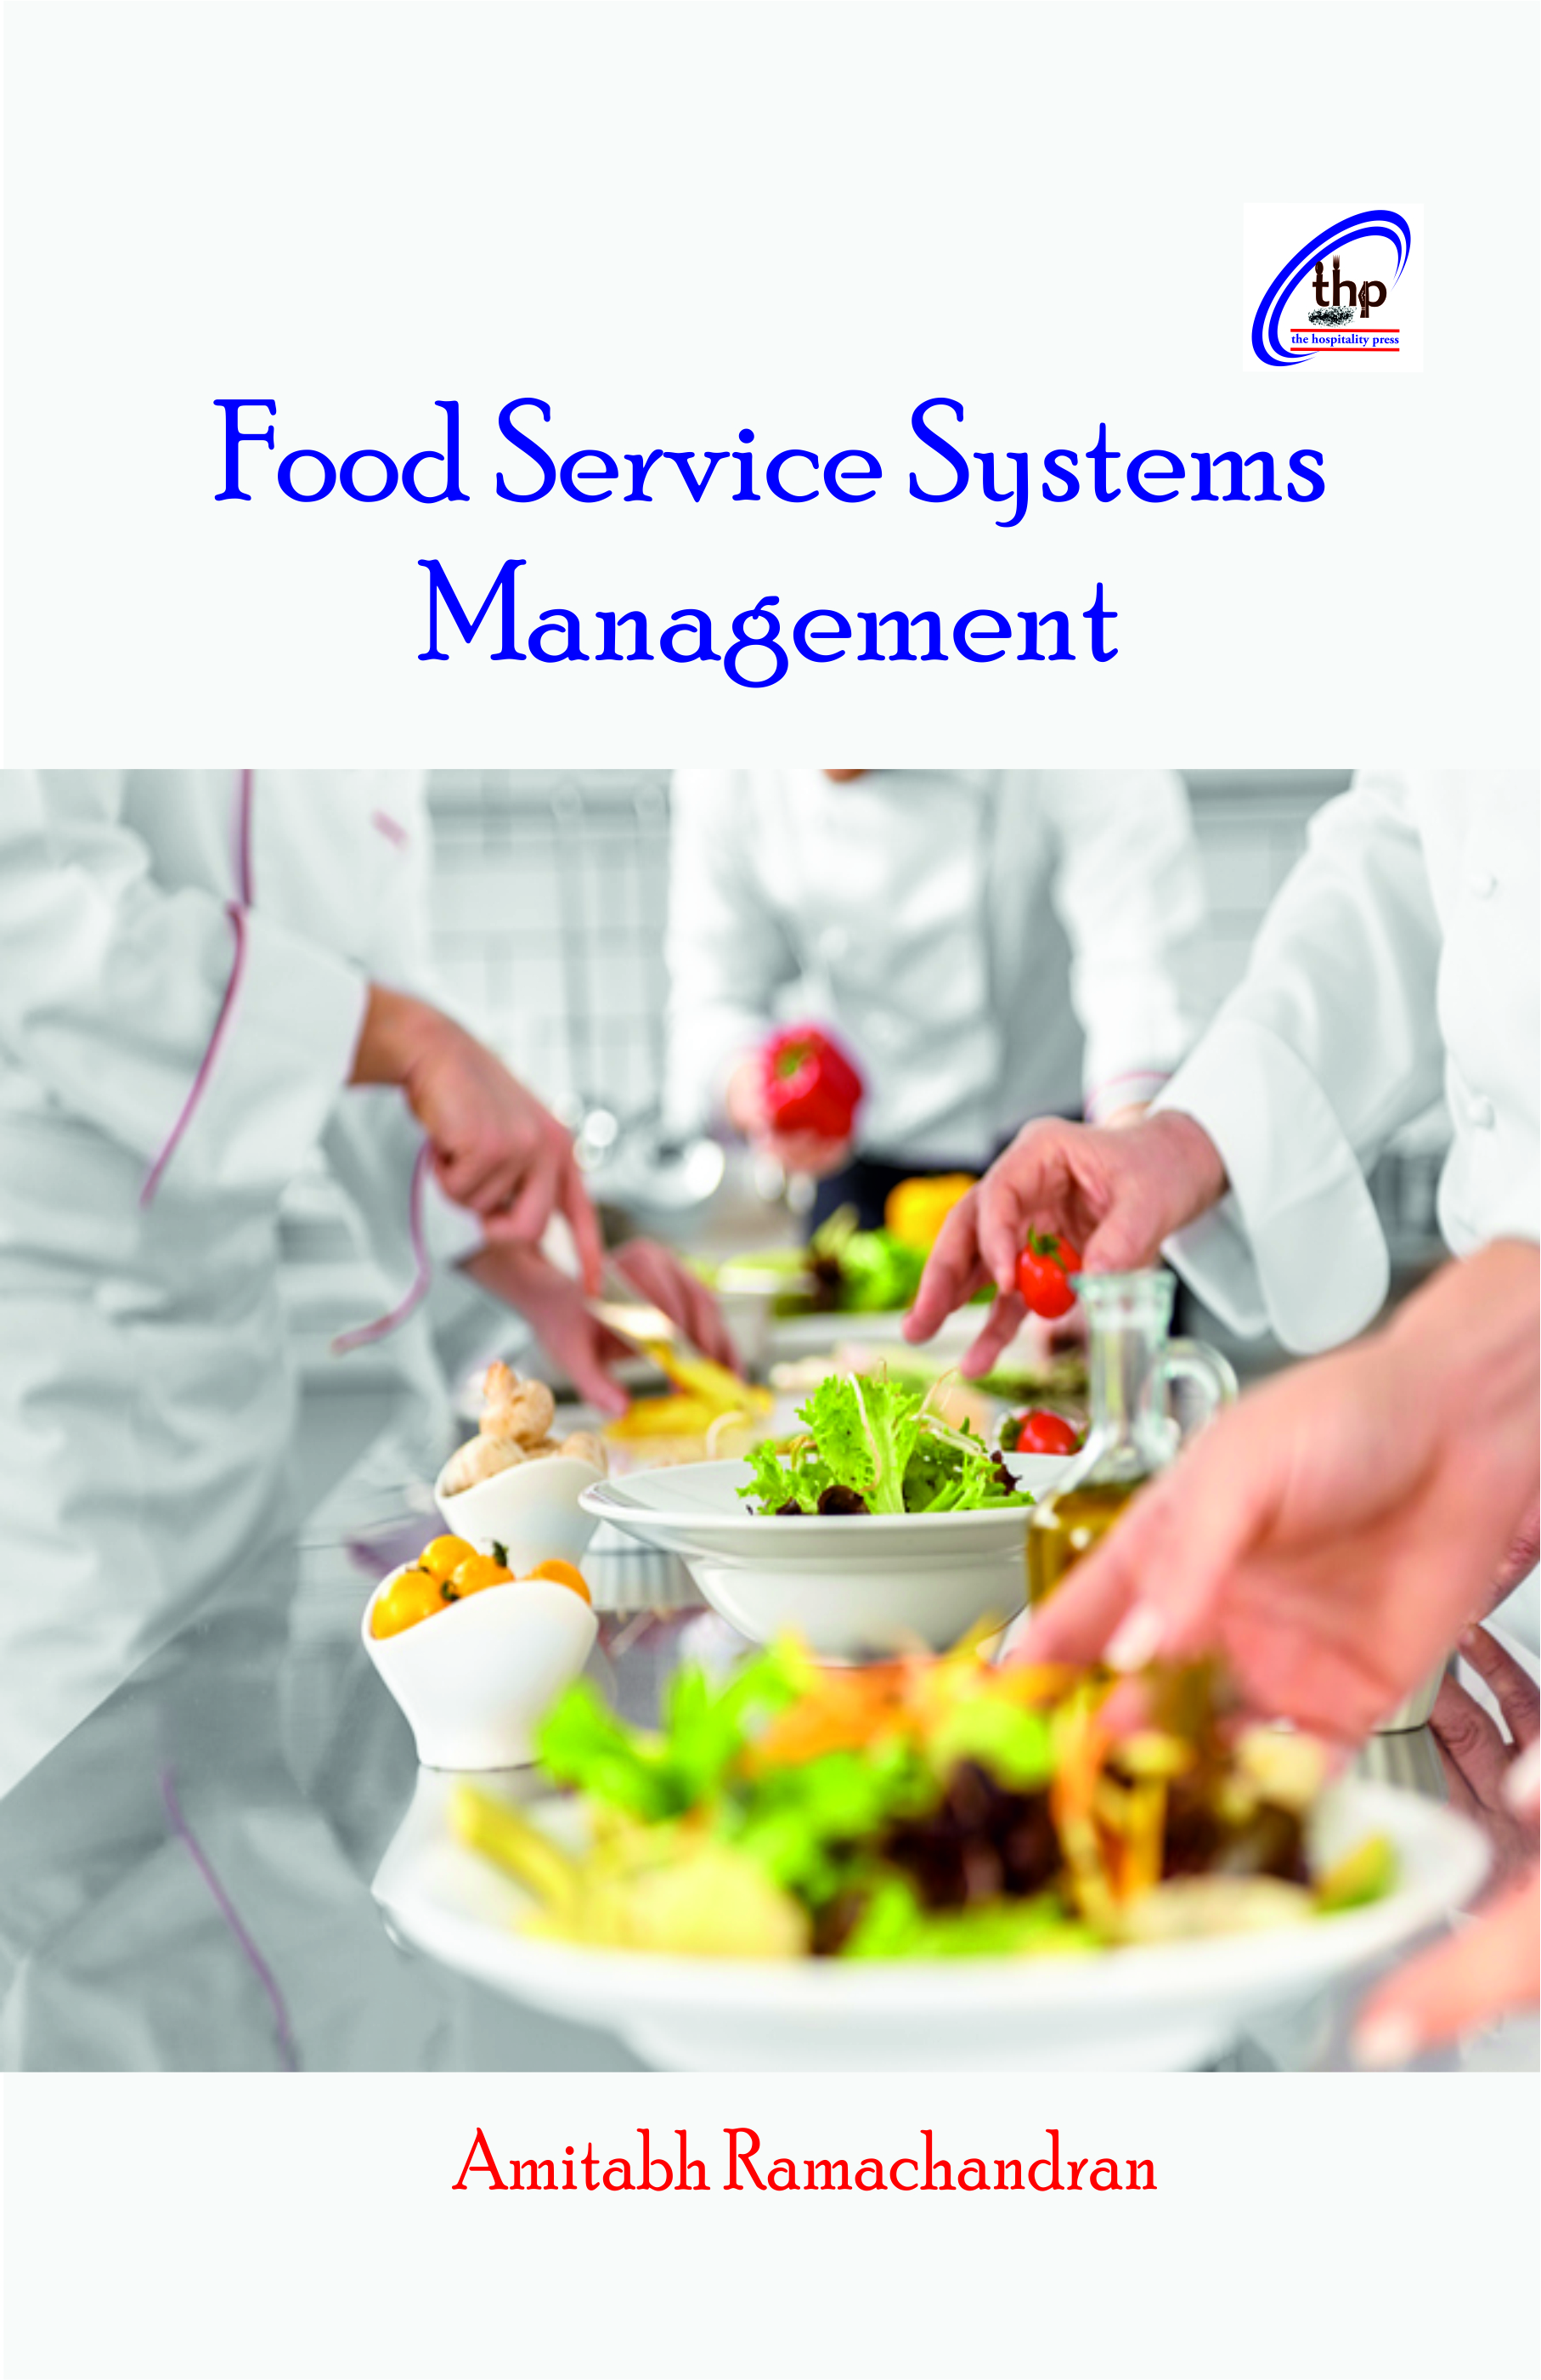 Food Service Systems Management